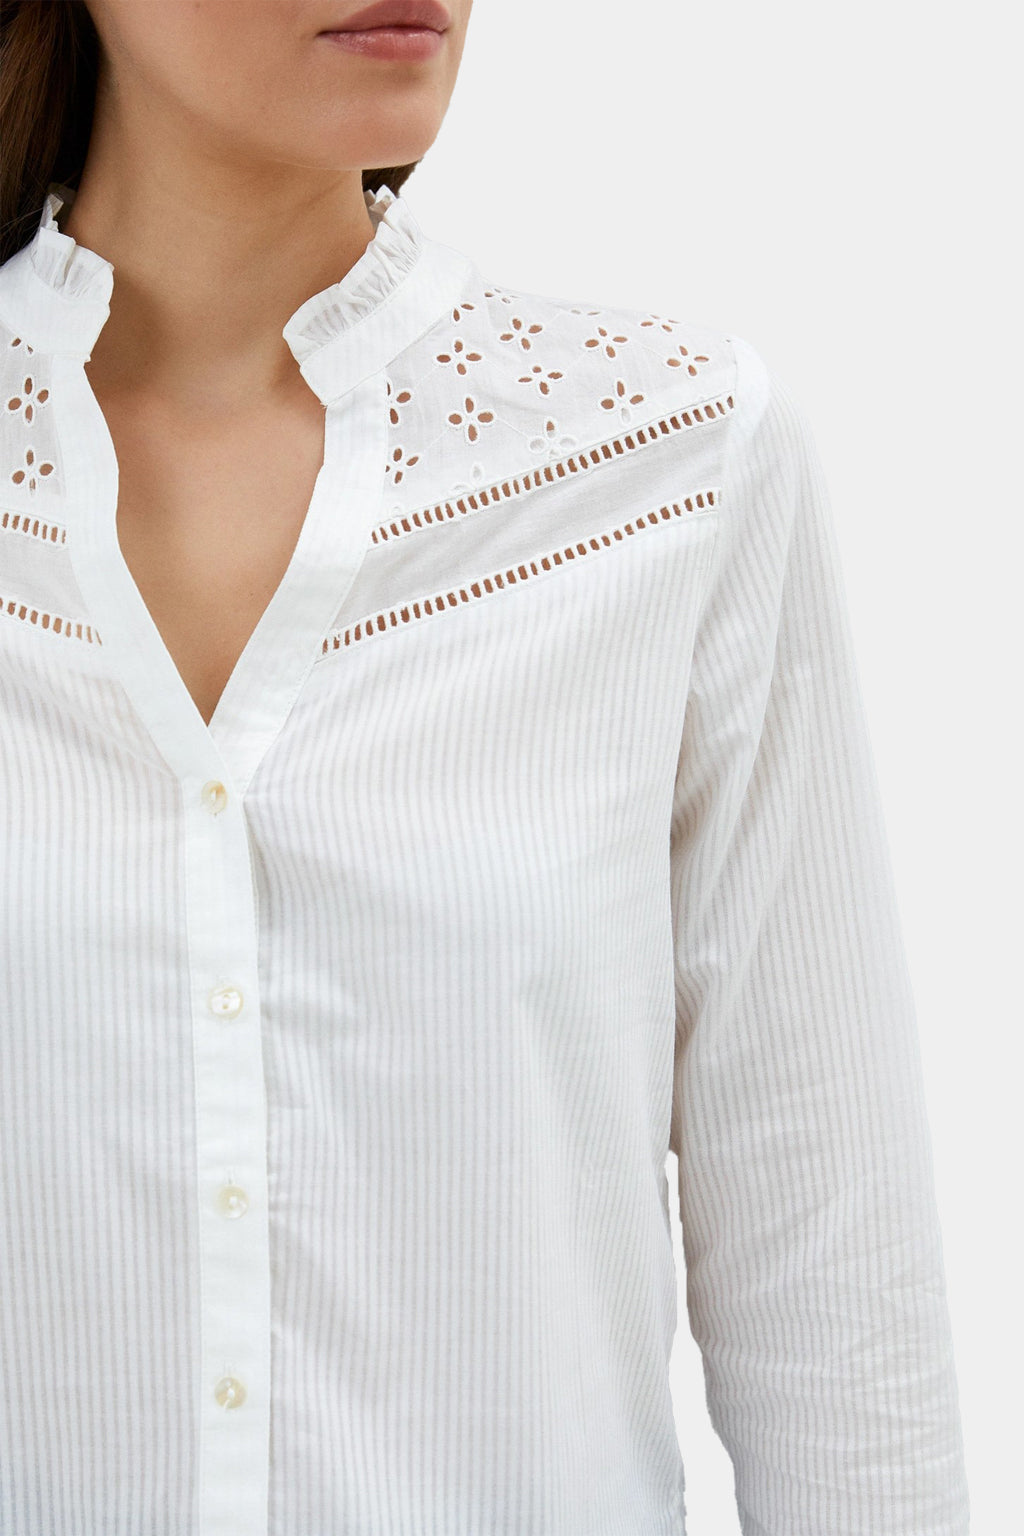 Spring Field - Button Down Shirts